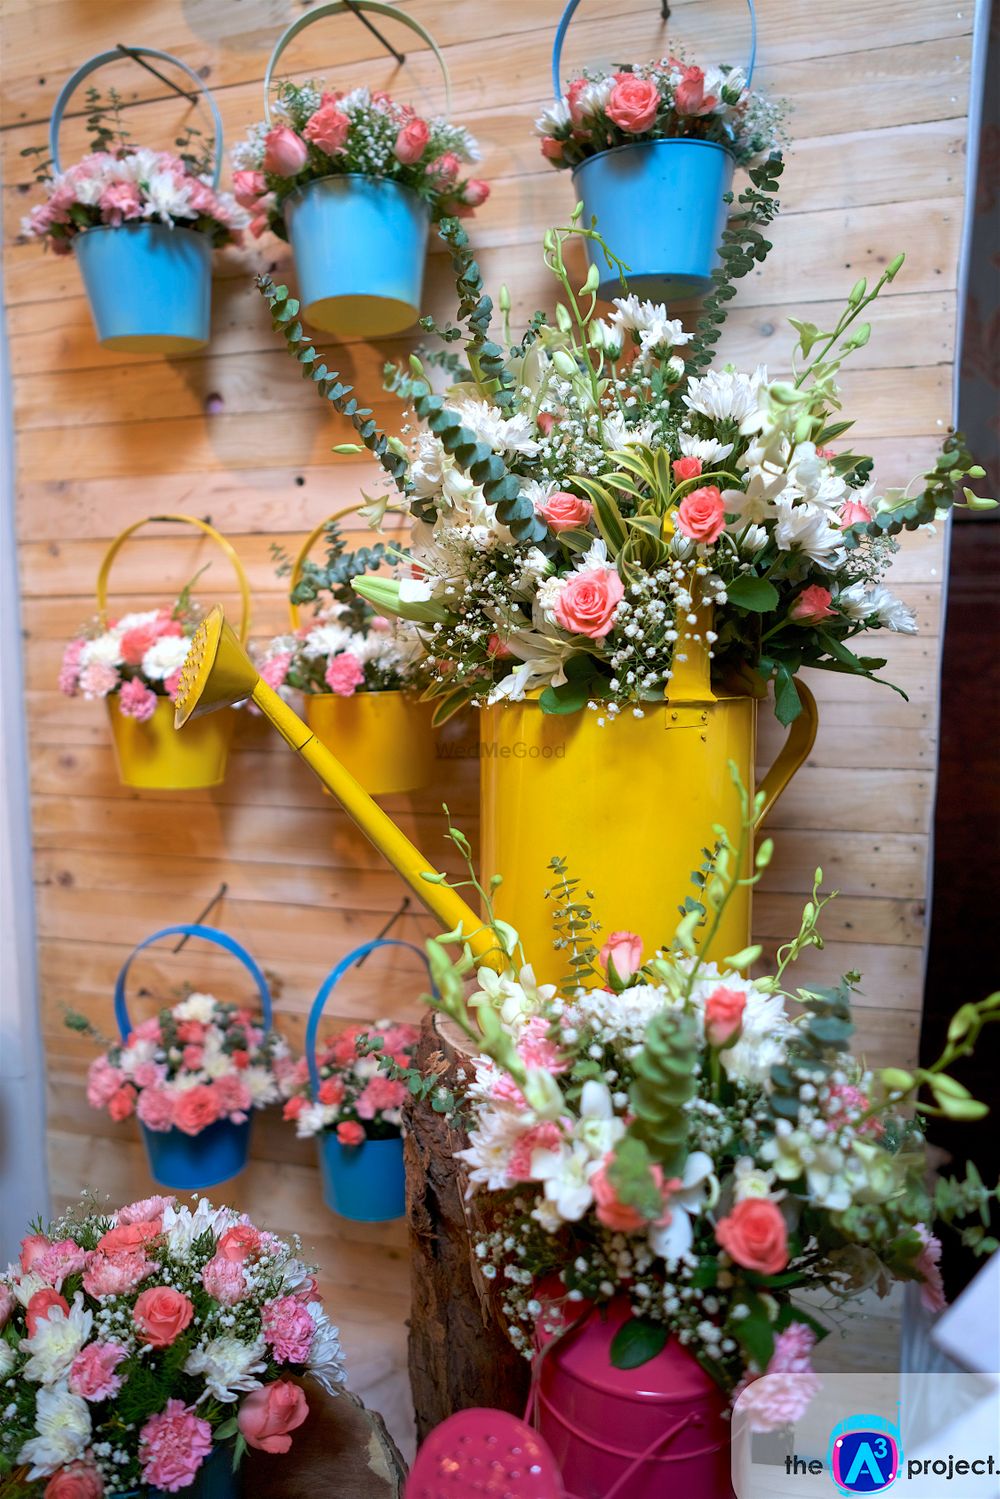 Photo of Cute Floral Arrangement with Watering Cans and Buckets